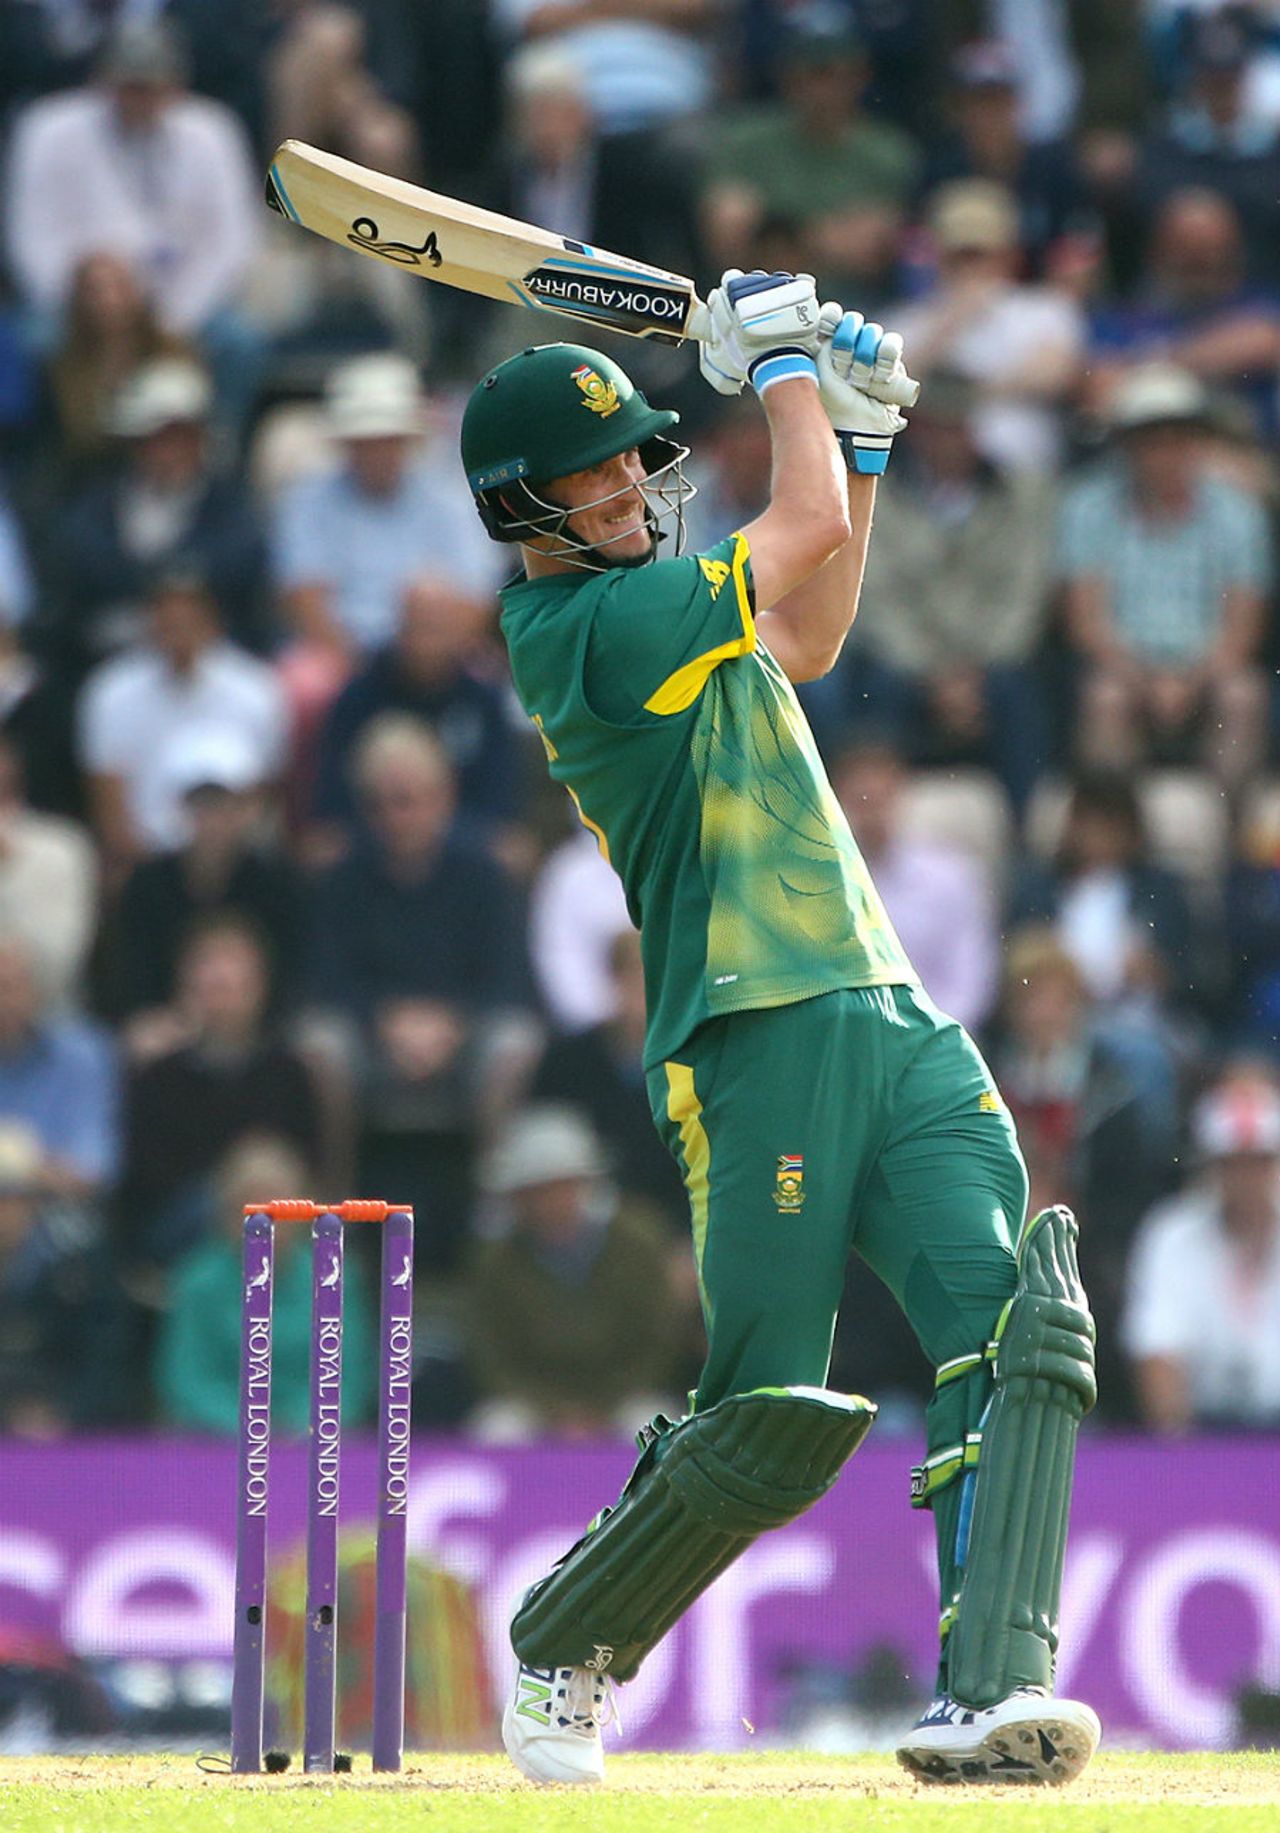 Chris Morris's hard hitting took South Africa to the brink of victory, England v South Africa, 2nd ODI, Ageas Bowl, May 27, 2017